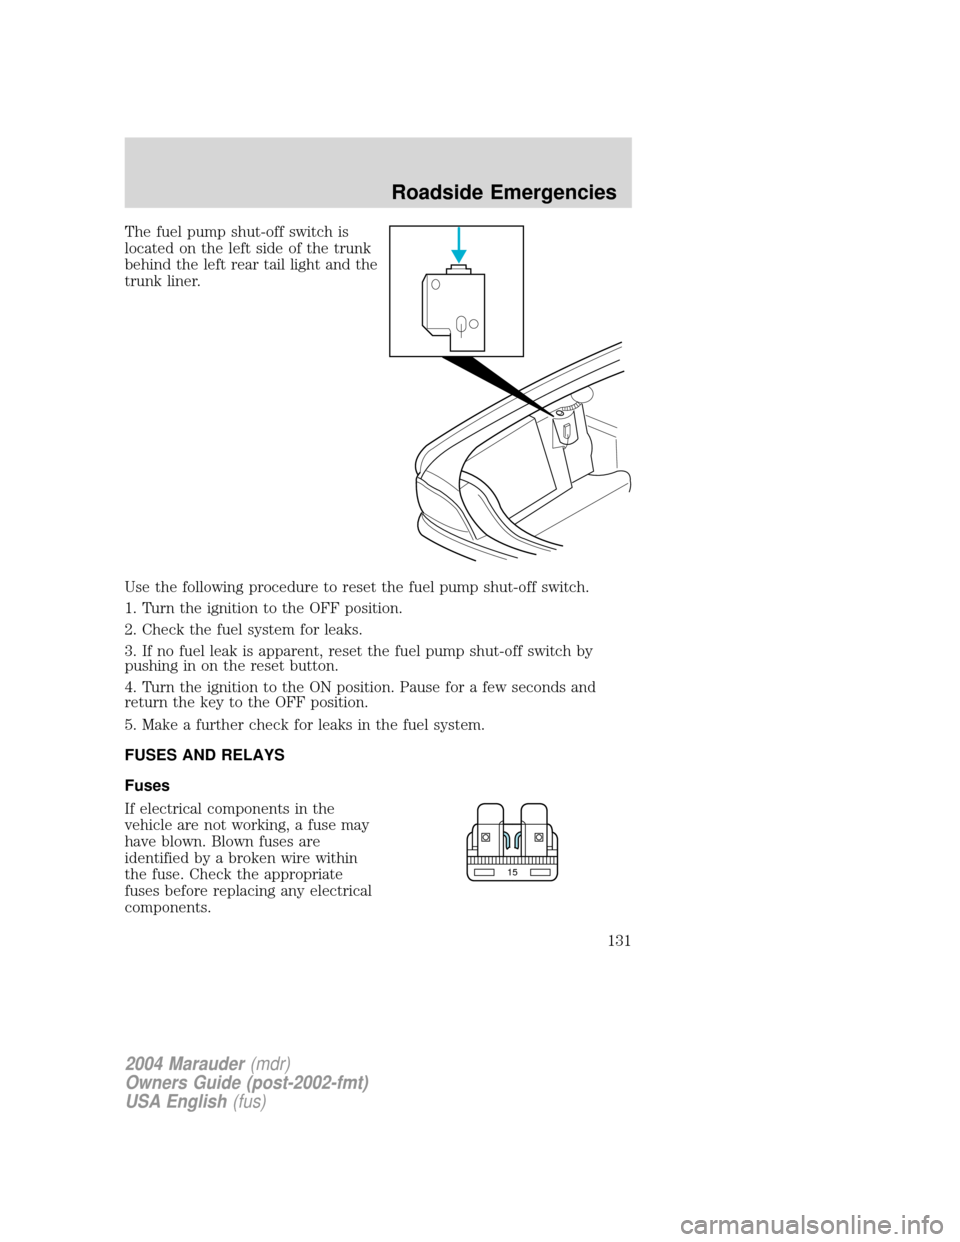 Mercury Marauder 2004  Owners Manuals The fuel pump shut-off switch is
located on the left side of the trunk
behind the left rear tail light and the
trunk liner.
Use the following procedure to reset the fuel pump shut-off switch.
1. Turn 